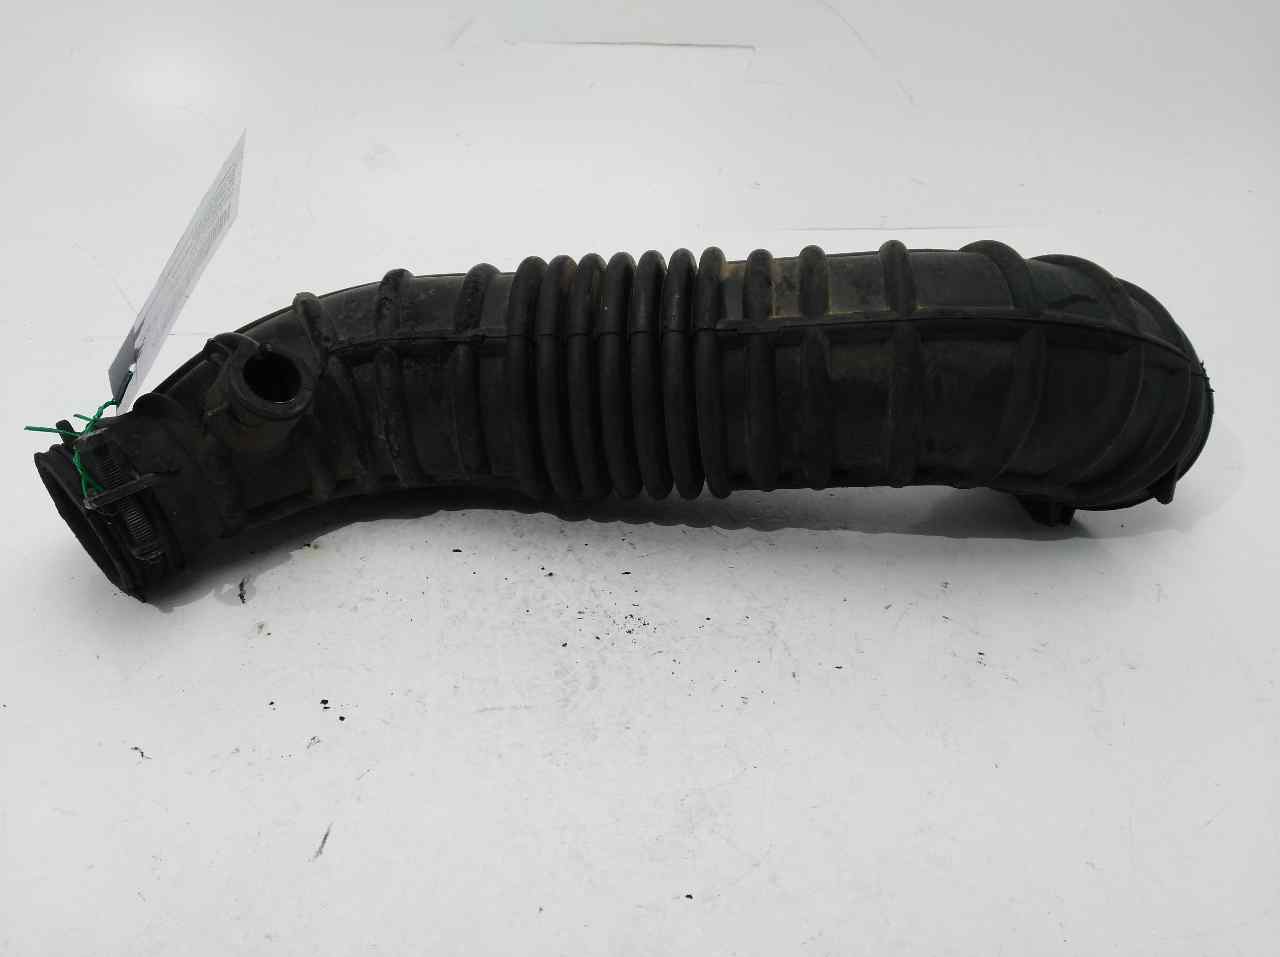 KIA Carens 2 generation (2009-2021) Other part 281382G300 25300301